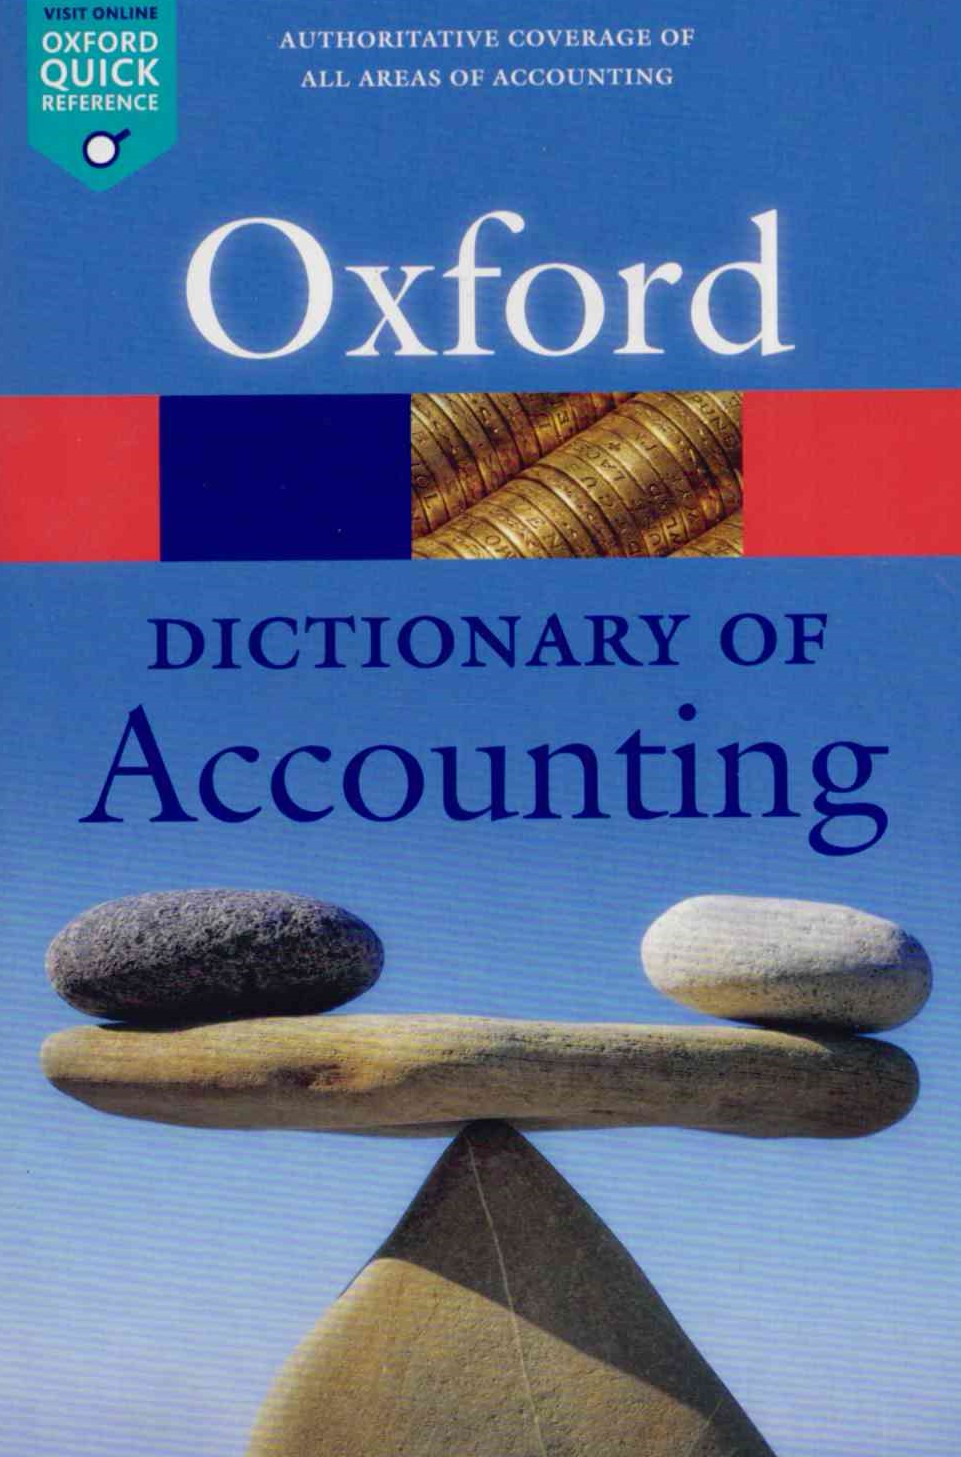 Oxford Dictionary of Accounting (5th Edition)